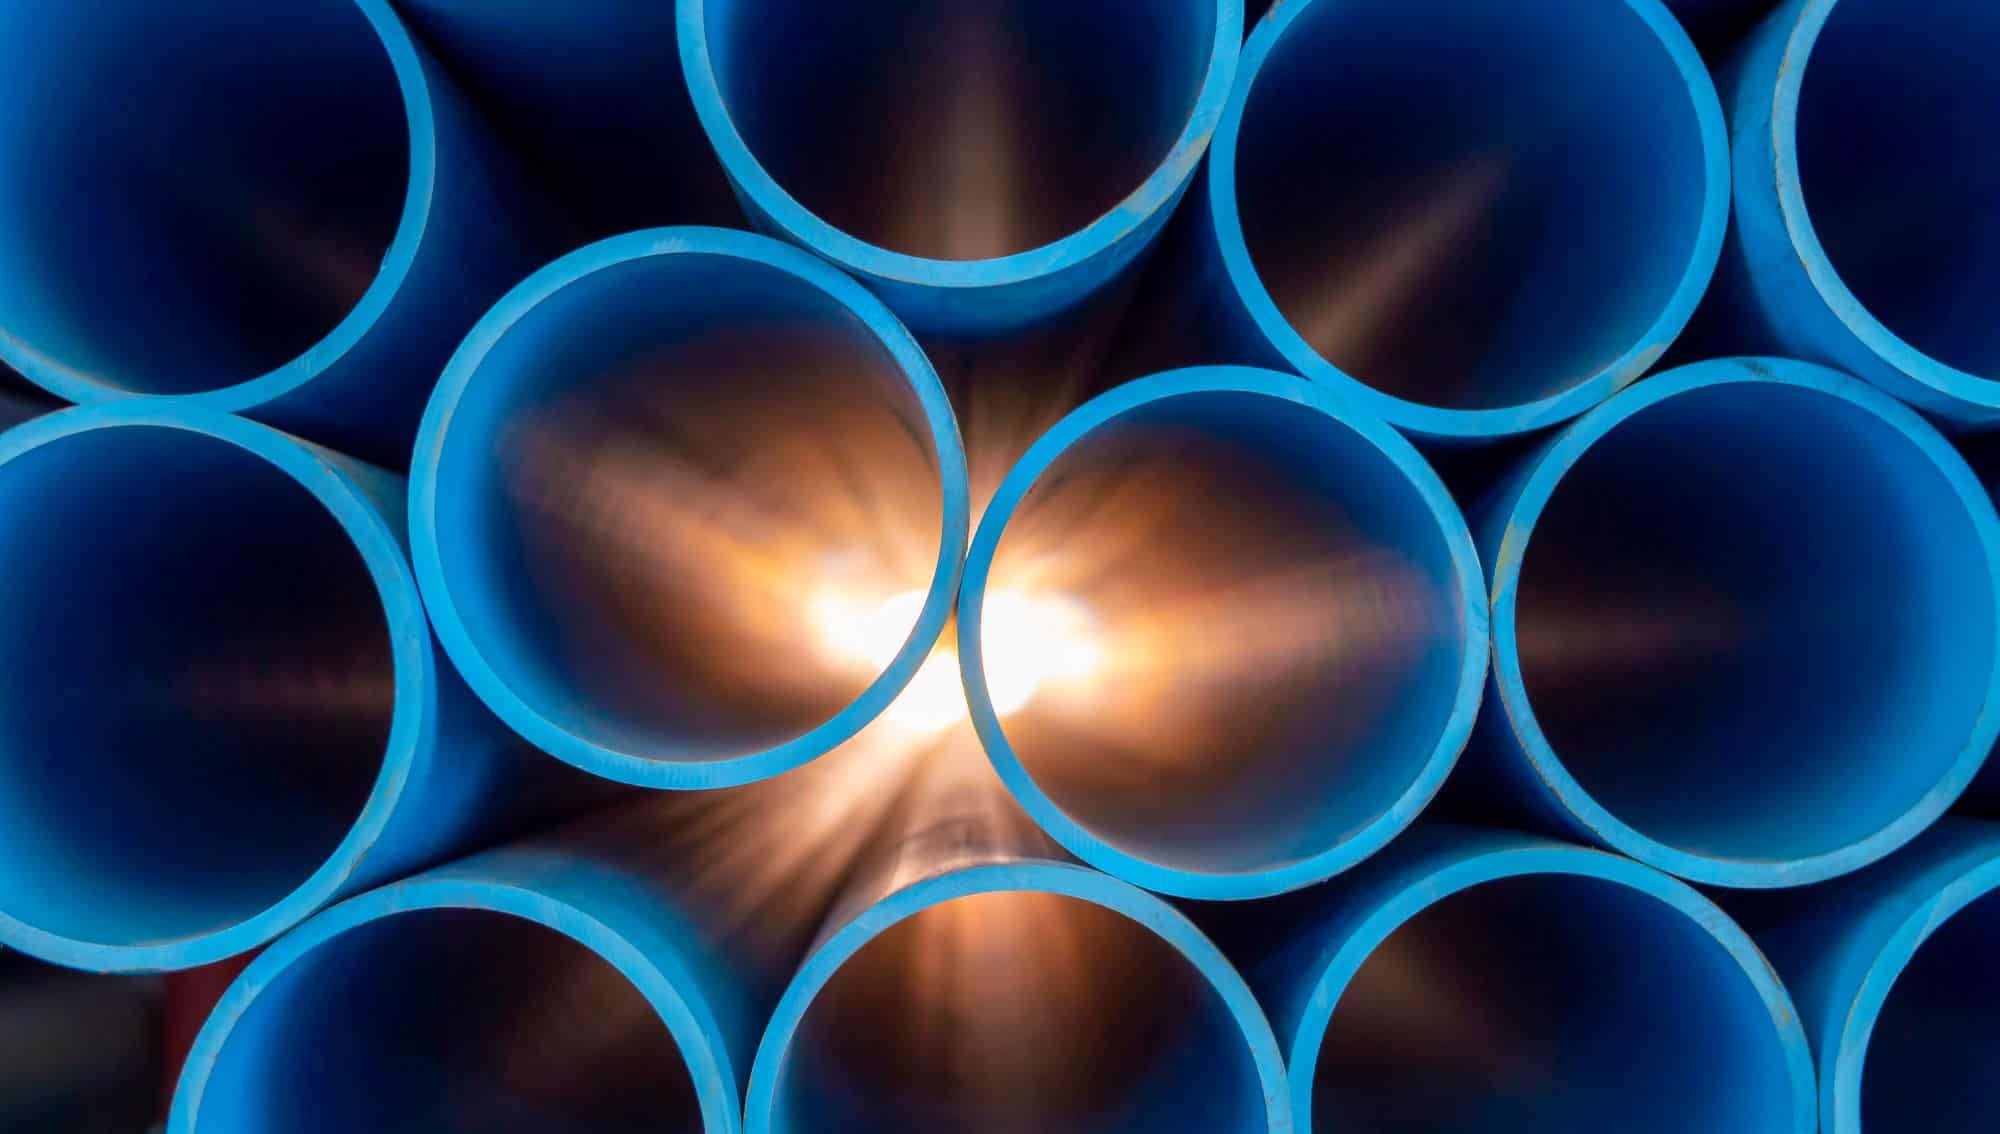 A model bundle of blue PVC pipes with light shining through the central conduit, designed for solving water pressure problems.